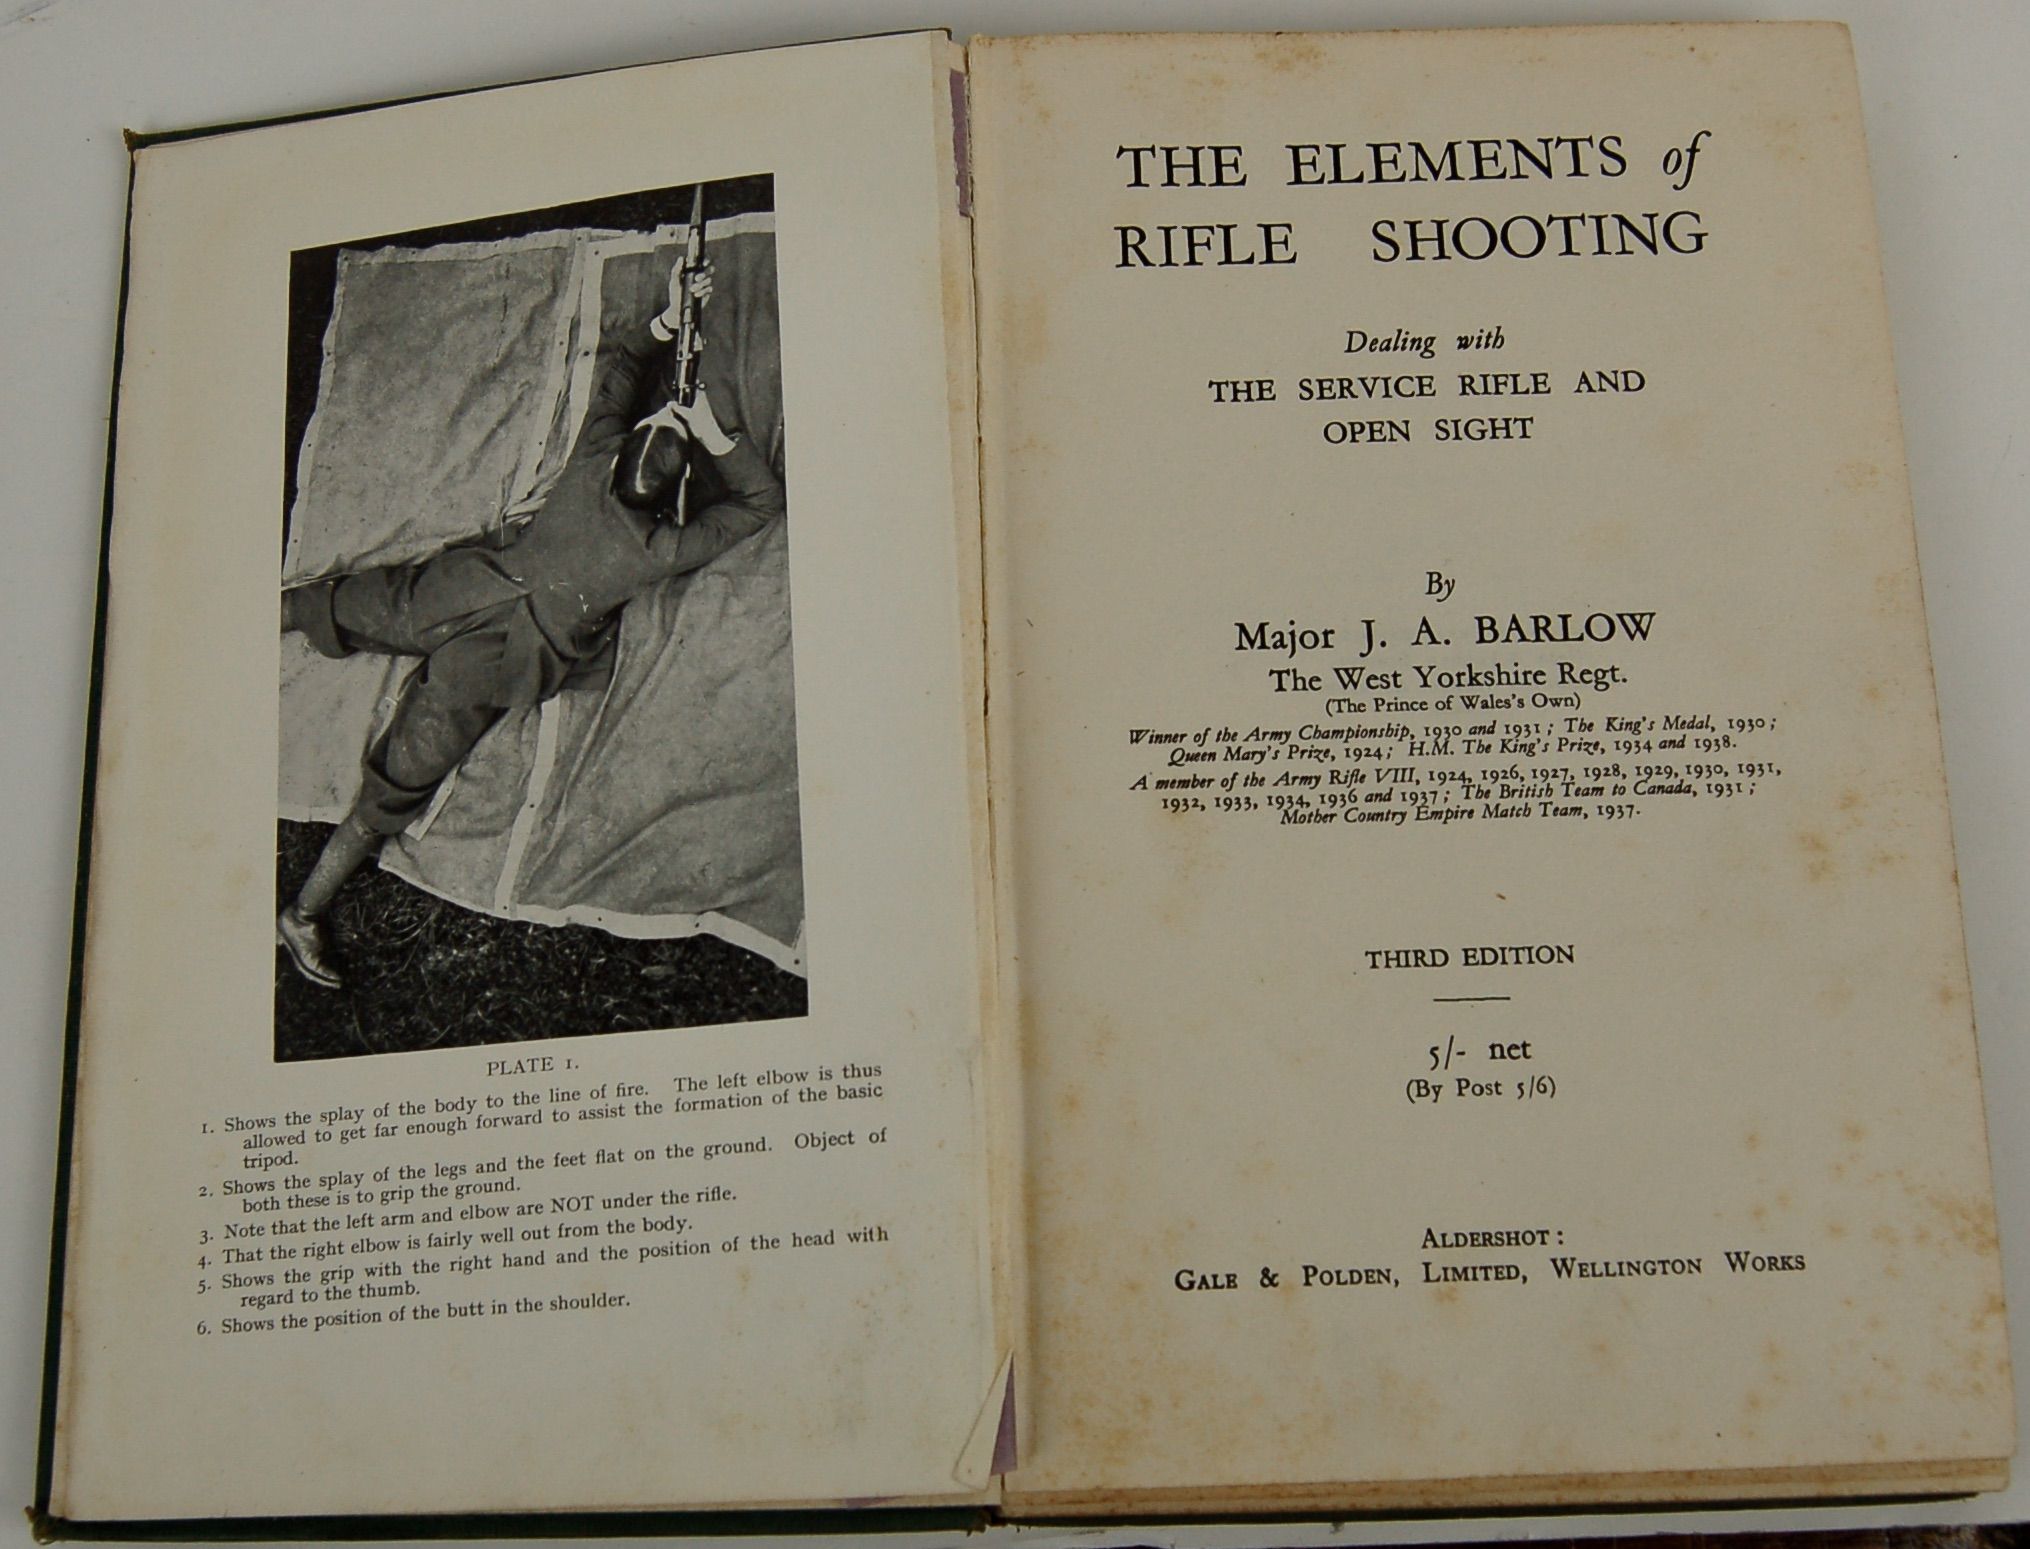 The Elements of Rifle Shooting